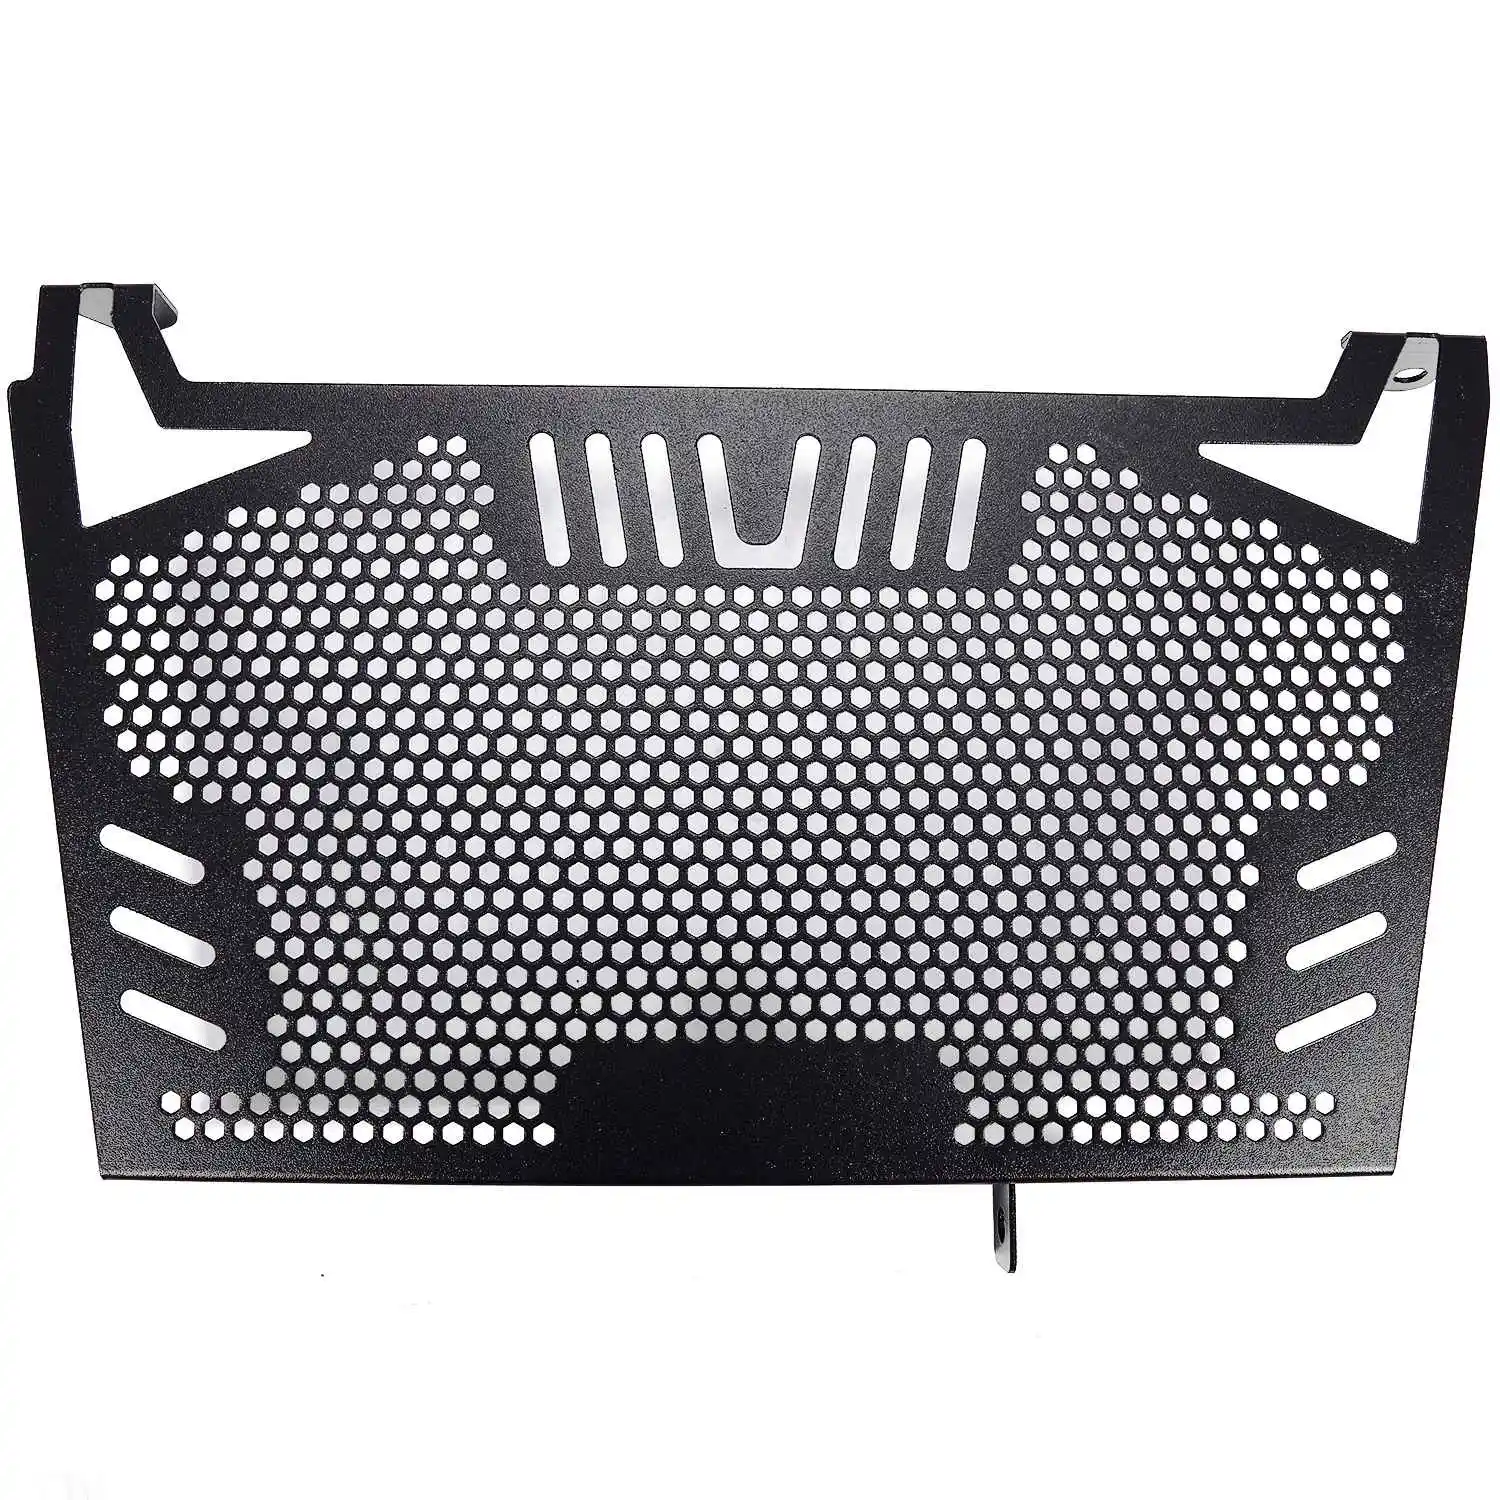 

Motorcycle Radiator Guard Protector Grille Oil Cooler Cover for Aprilia SHIVER GT 750 SHIVER 900 2017-2018 Motorcycle